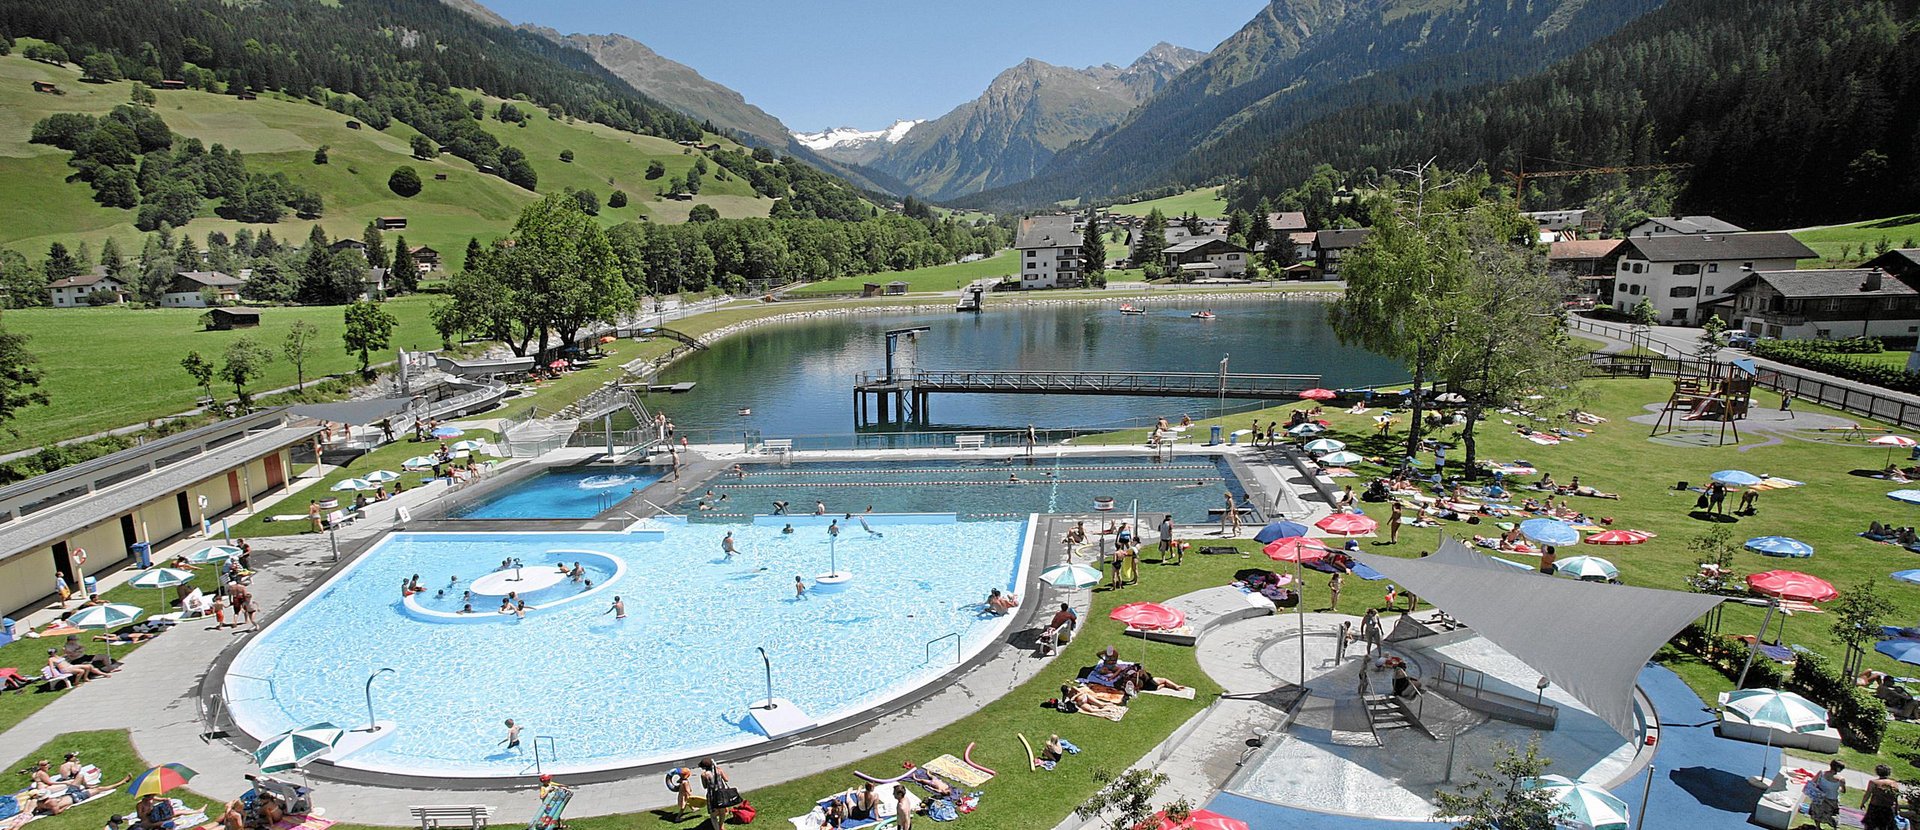 Lido Klosters